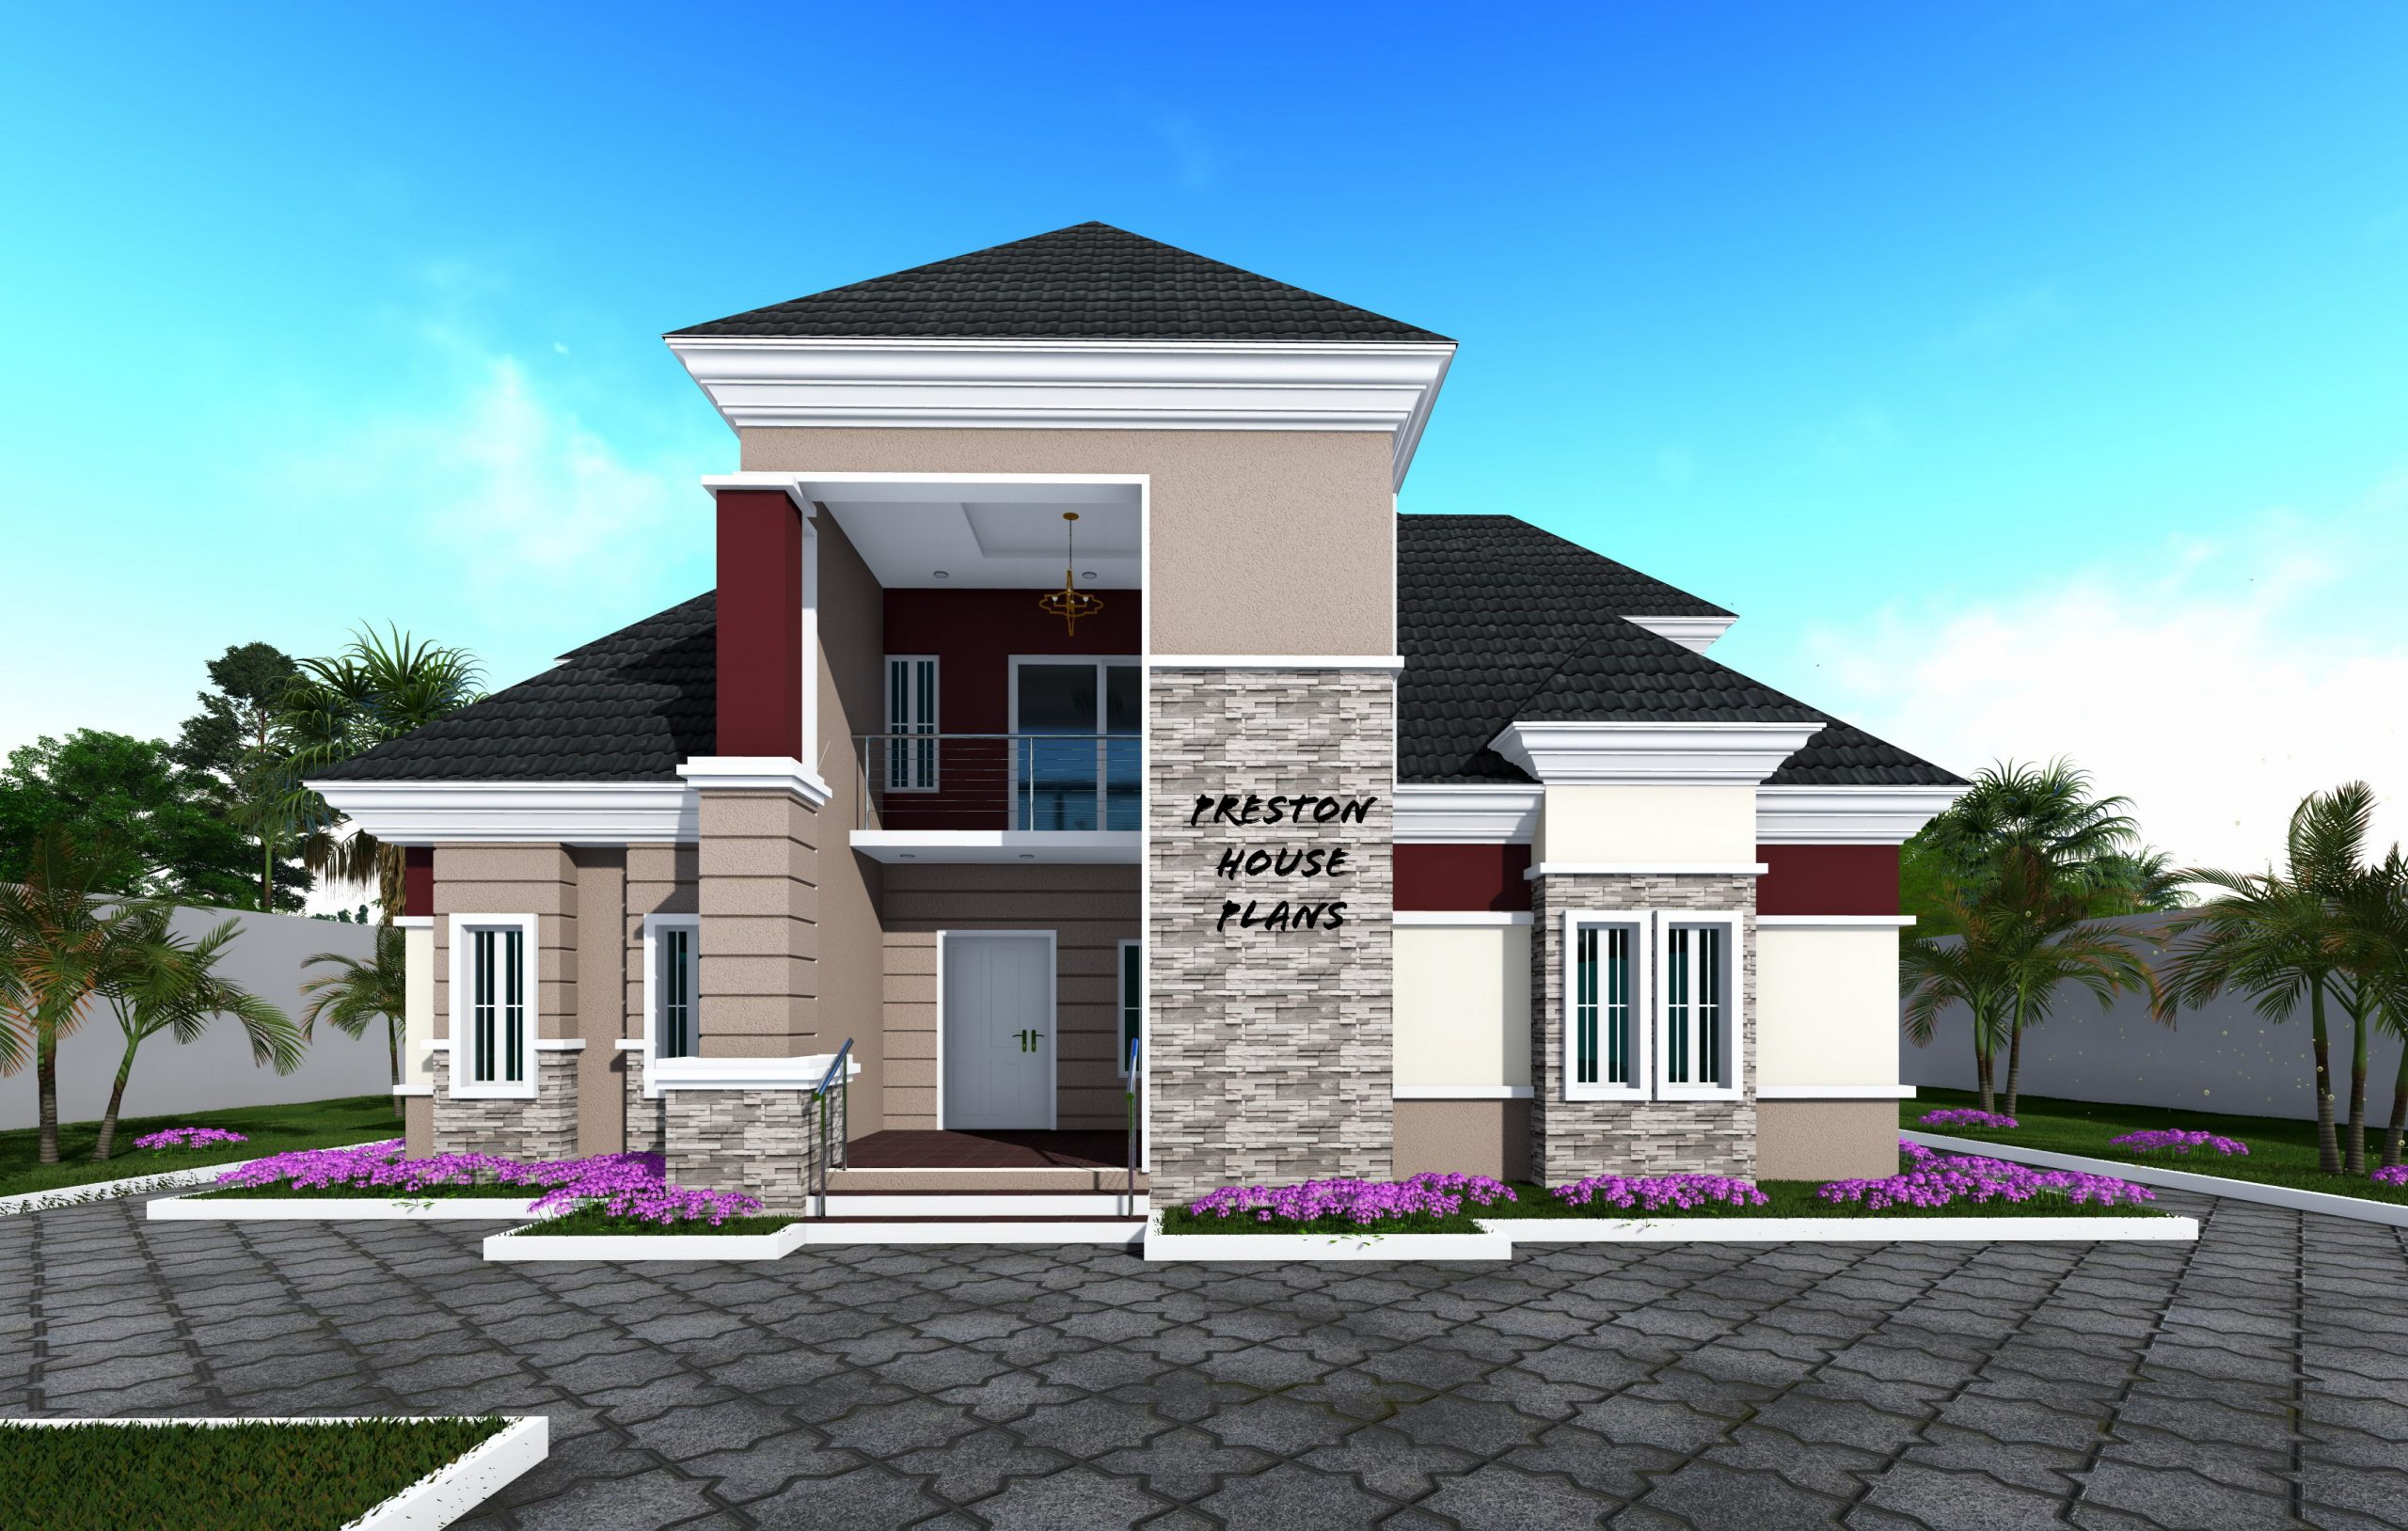 3 Bedroom Bungalow with a penthouse